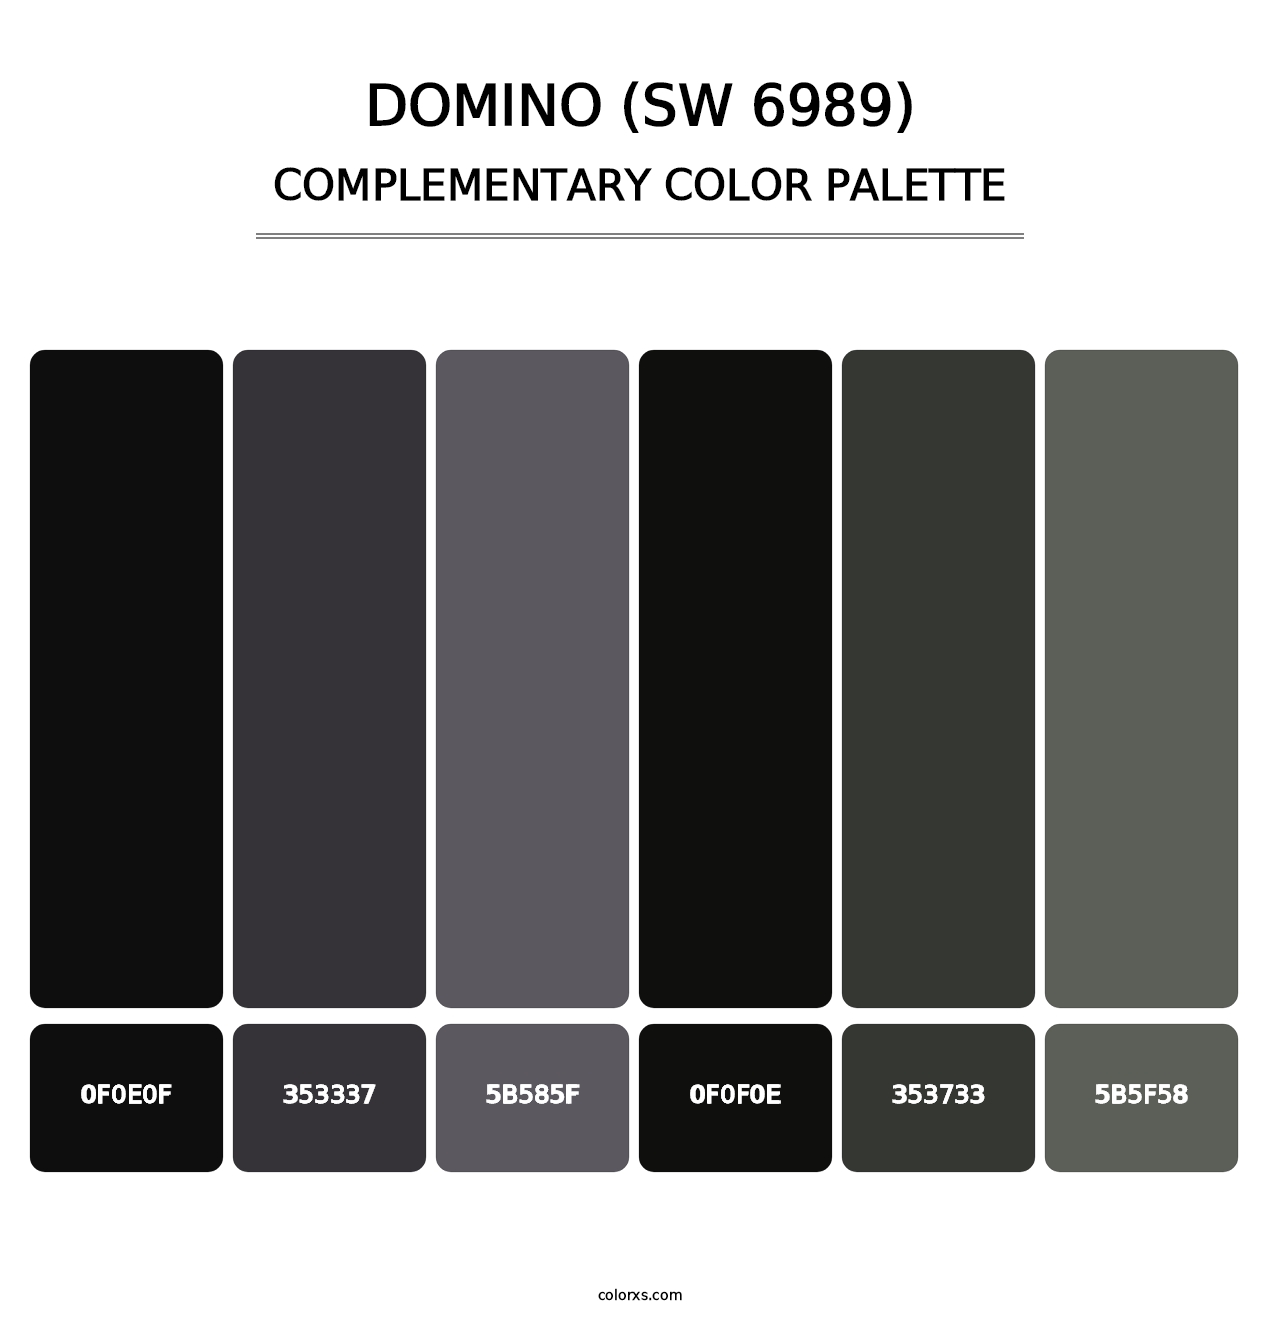 Domino (SW 6989) - Complementary Color Palette